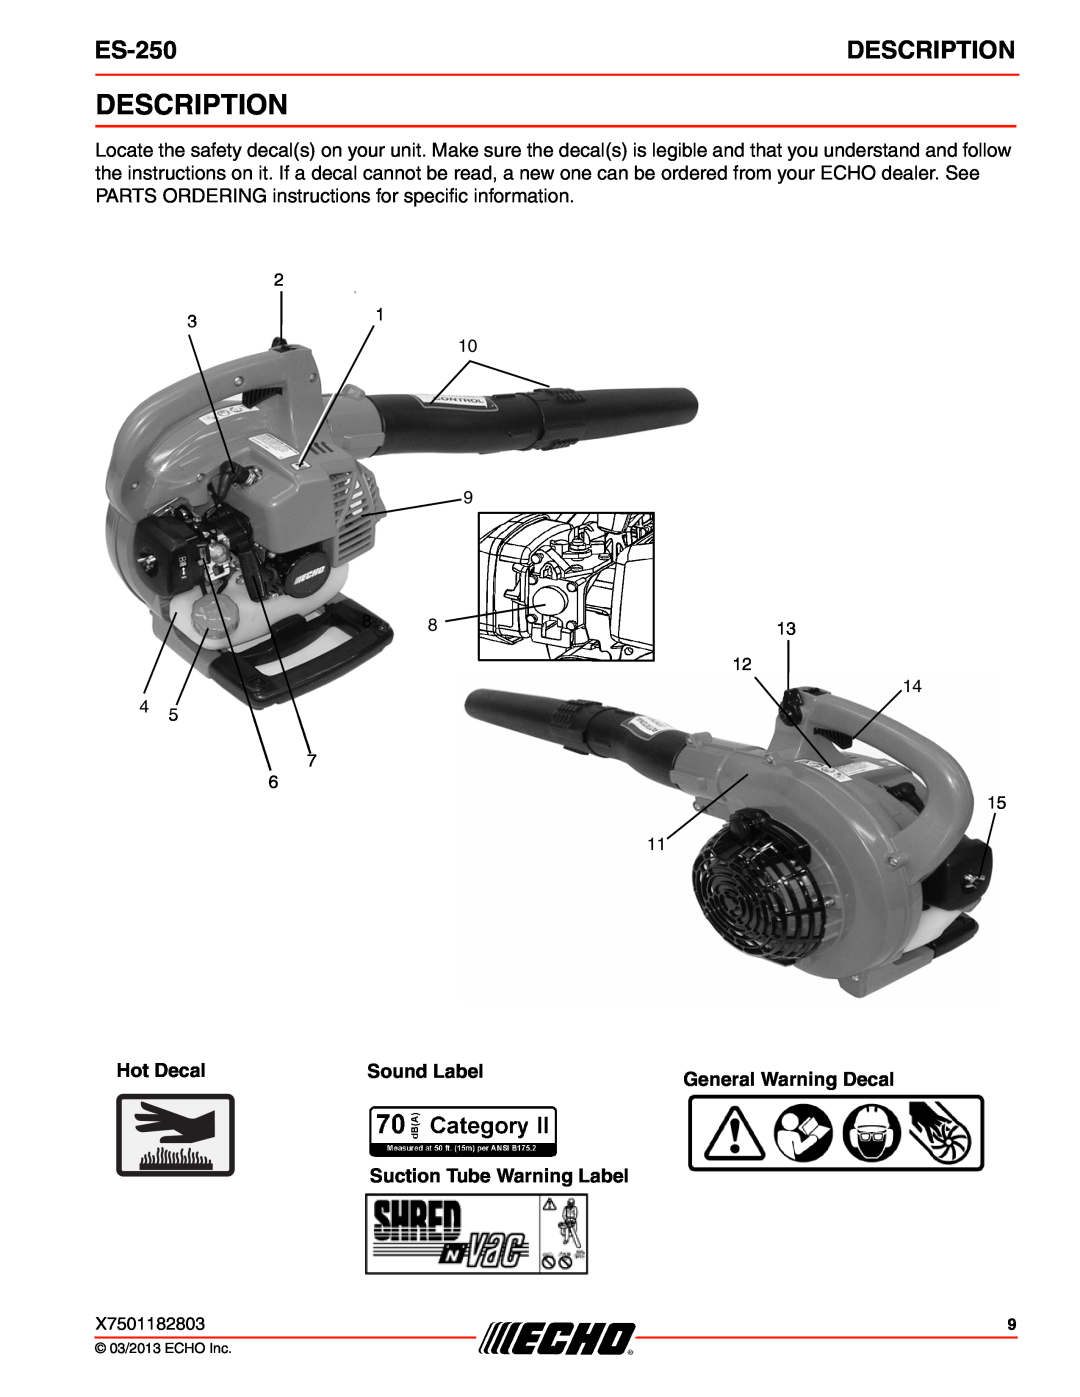 Echo ES-250 specifications Description, Hot Decal, Sound Label, Suction Tube Warning Label 